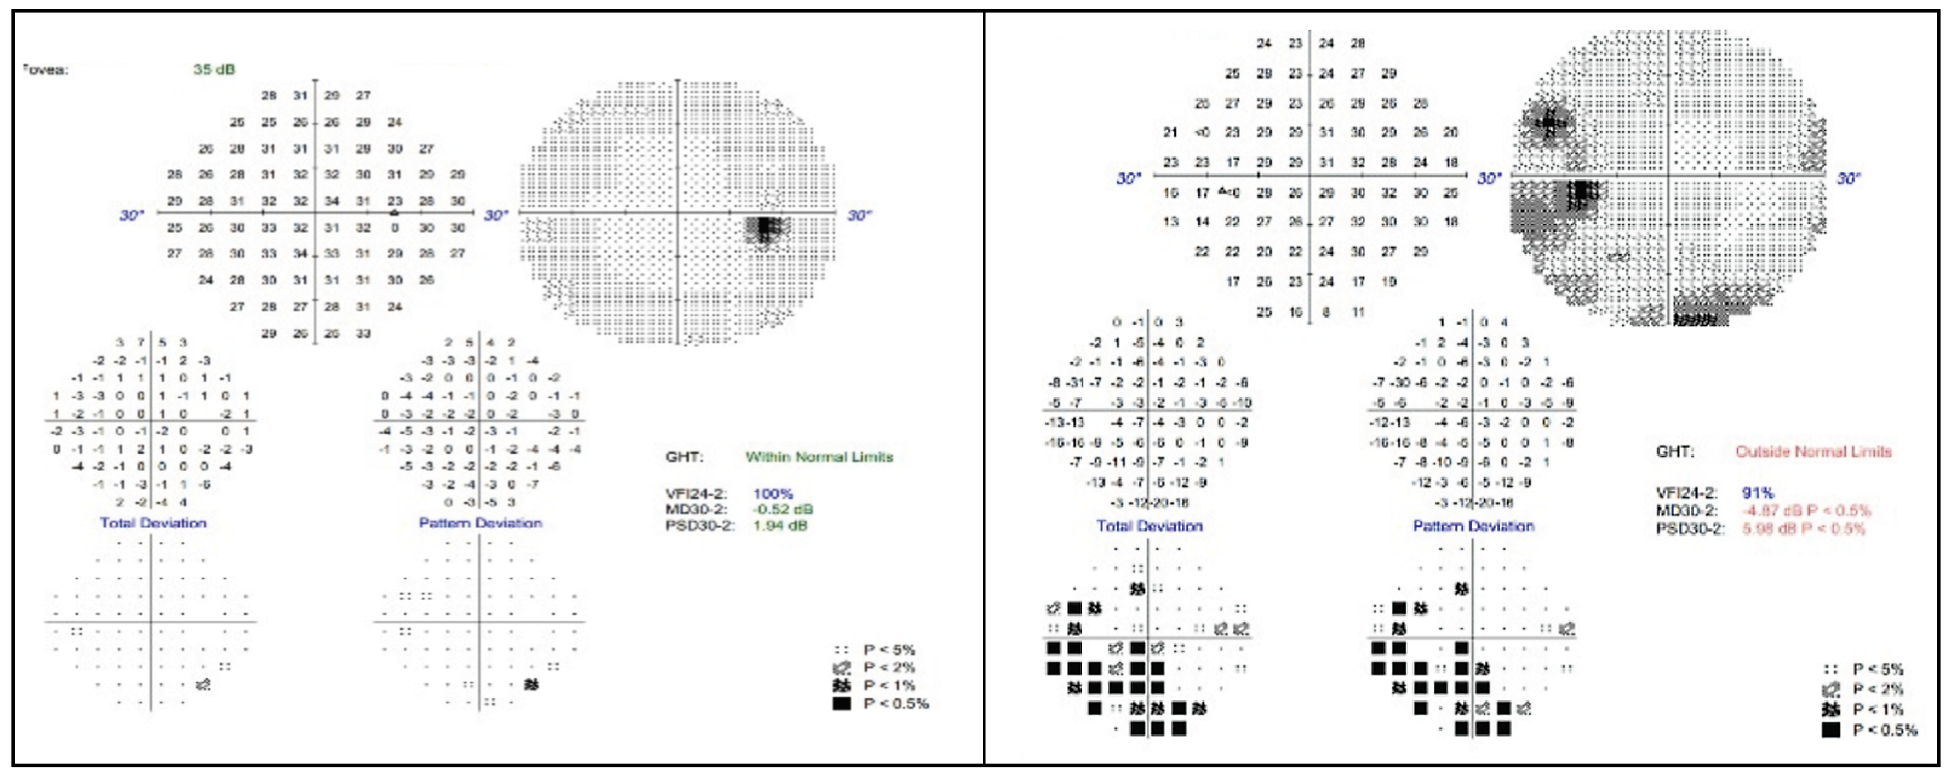 Fig. 1. 30-2 Humphrey visual field of the right eye (left) and left eye (right).